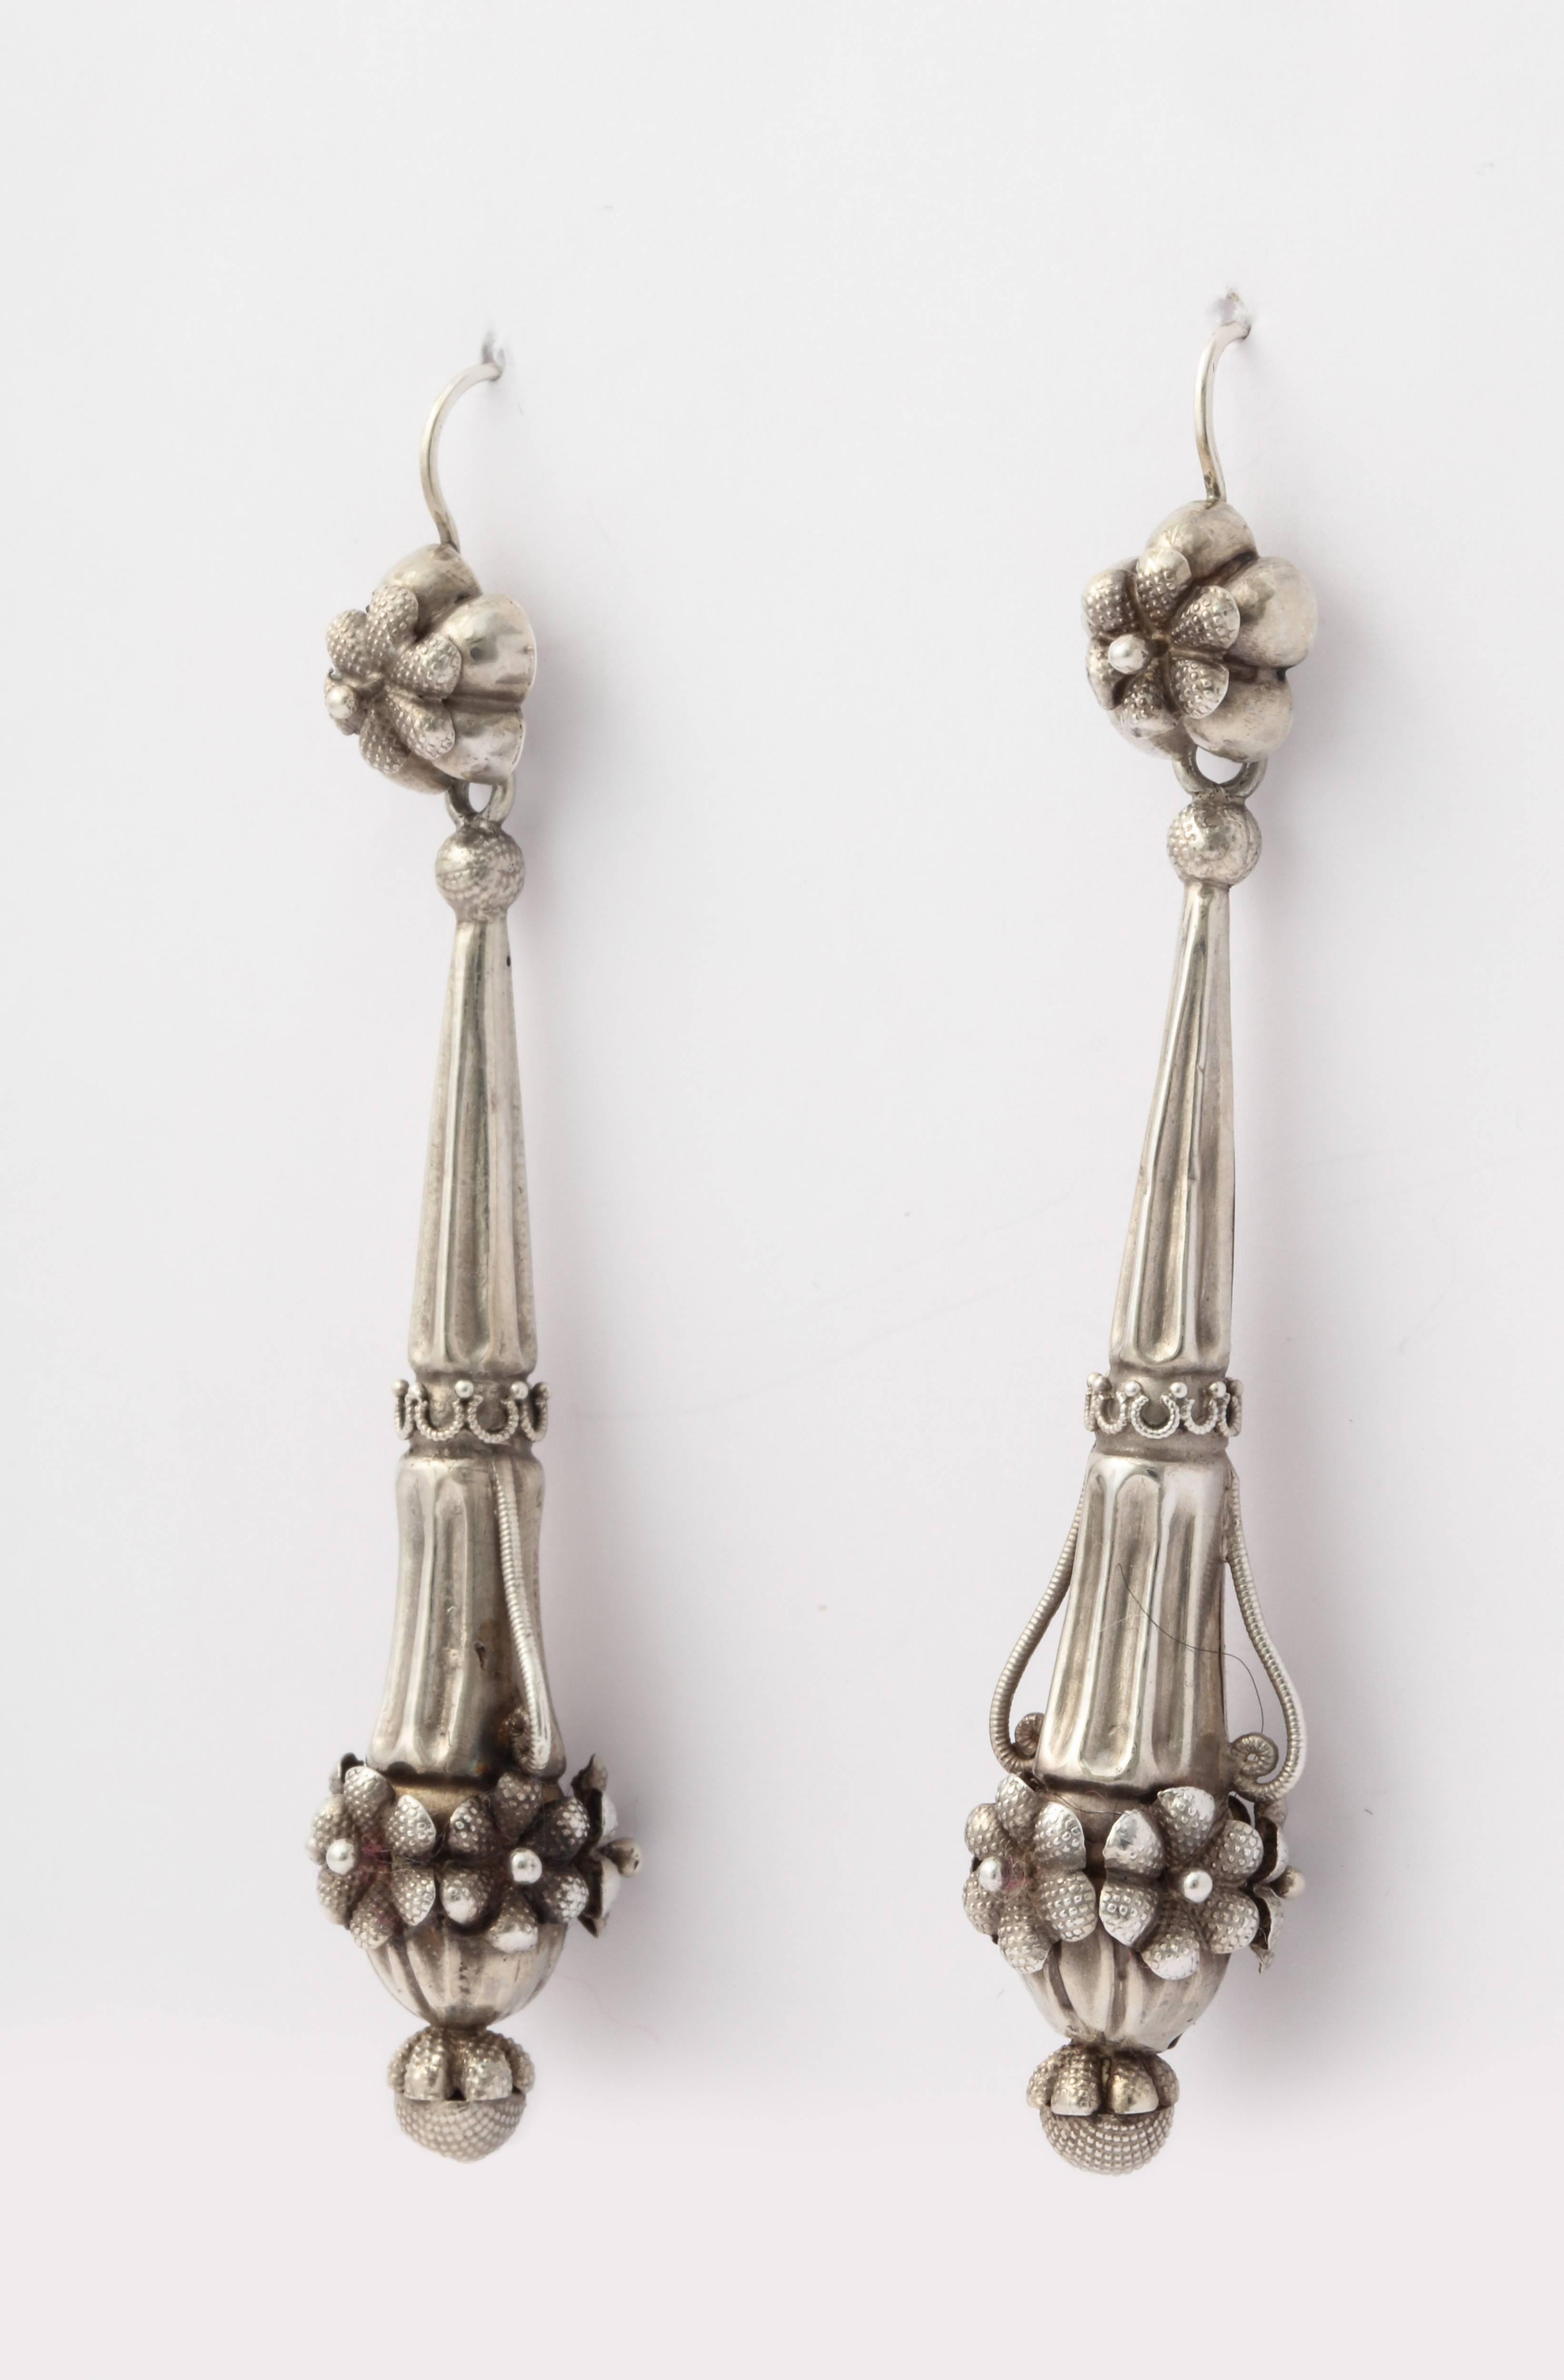 Very rarely do Georgian silver chandelier earrings come on the market. I can't say why, but truth be told, they are far more scarce than are gold. I had only one other pair in 30 years. This pair is a treat. The form is an inverted flute with